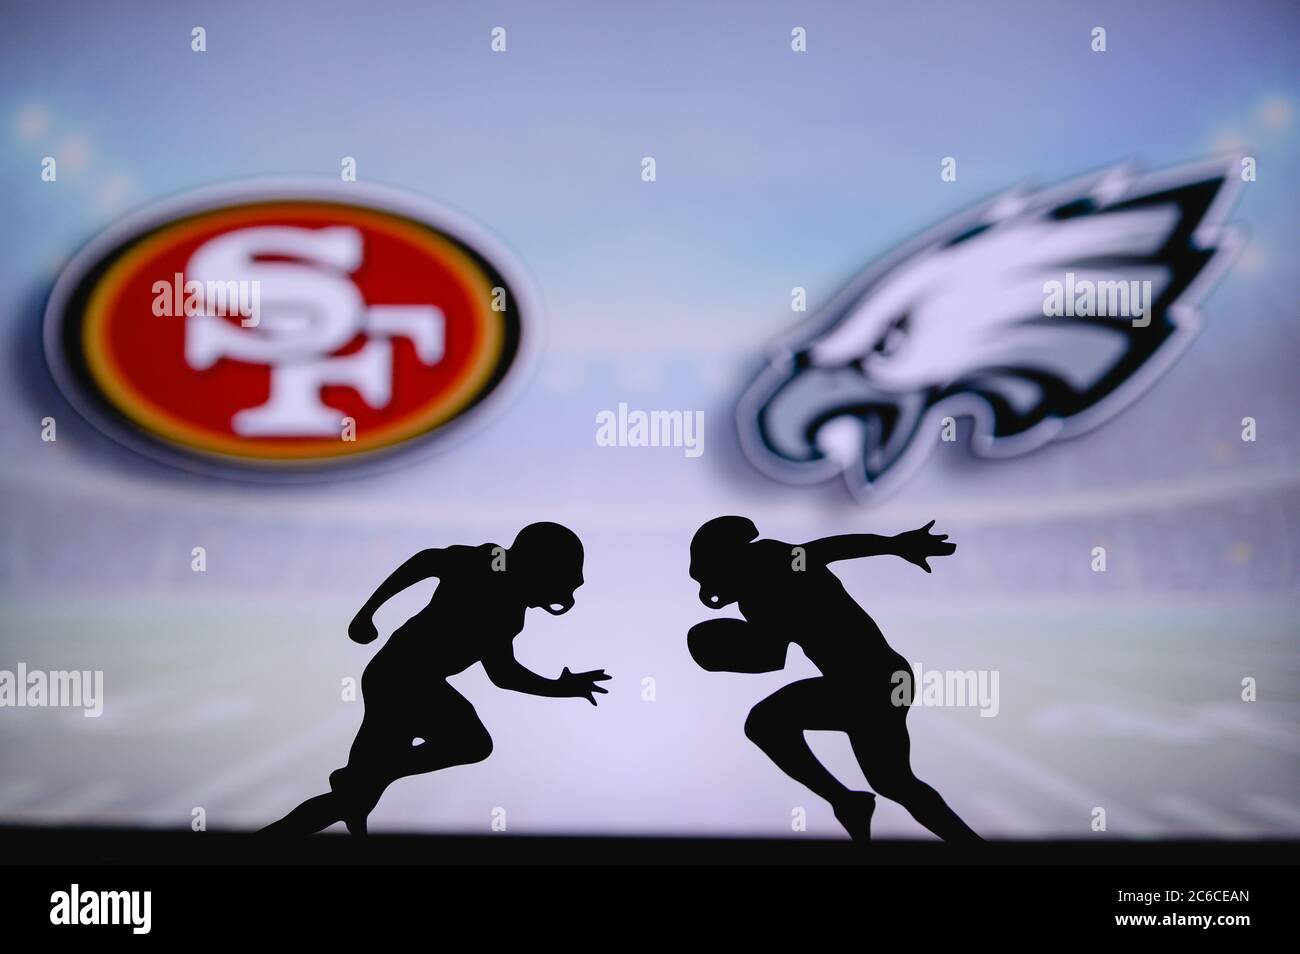 San Francisco 49ers vs. Philadelphia Eagles. NFL match poster. Two american  football players silhouette facing each other on the field. Clubs logo in  Stock Photo - Alamy